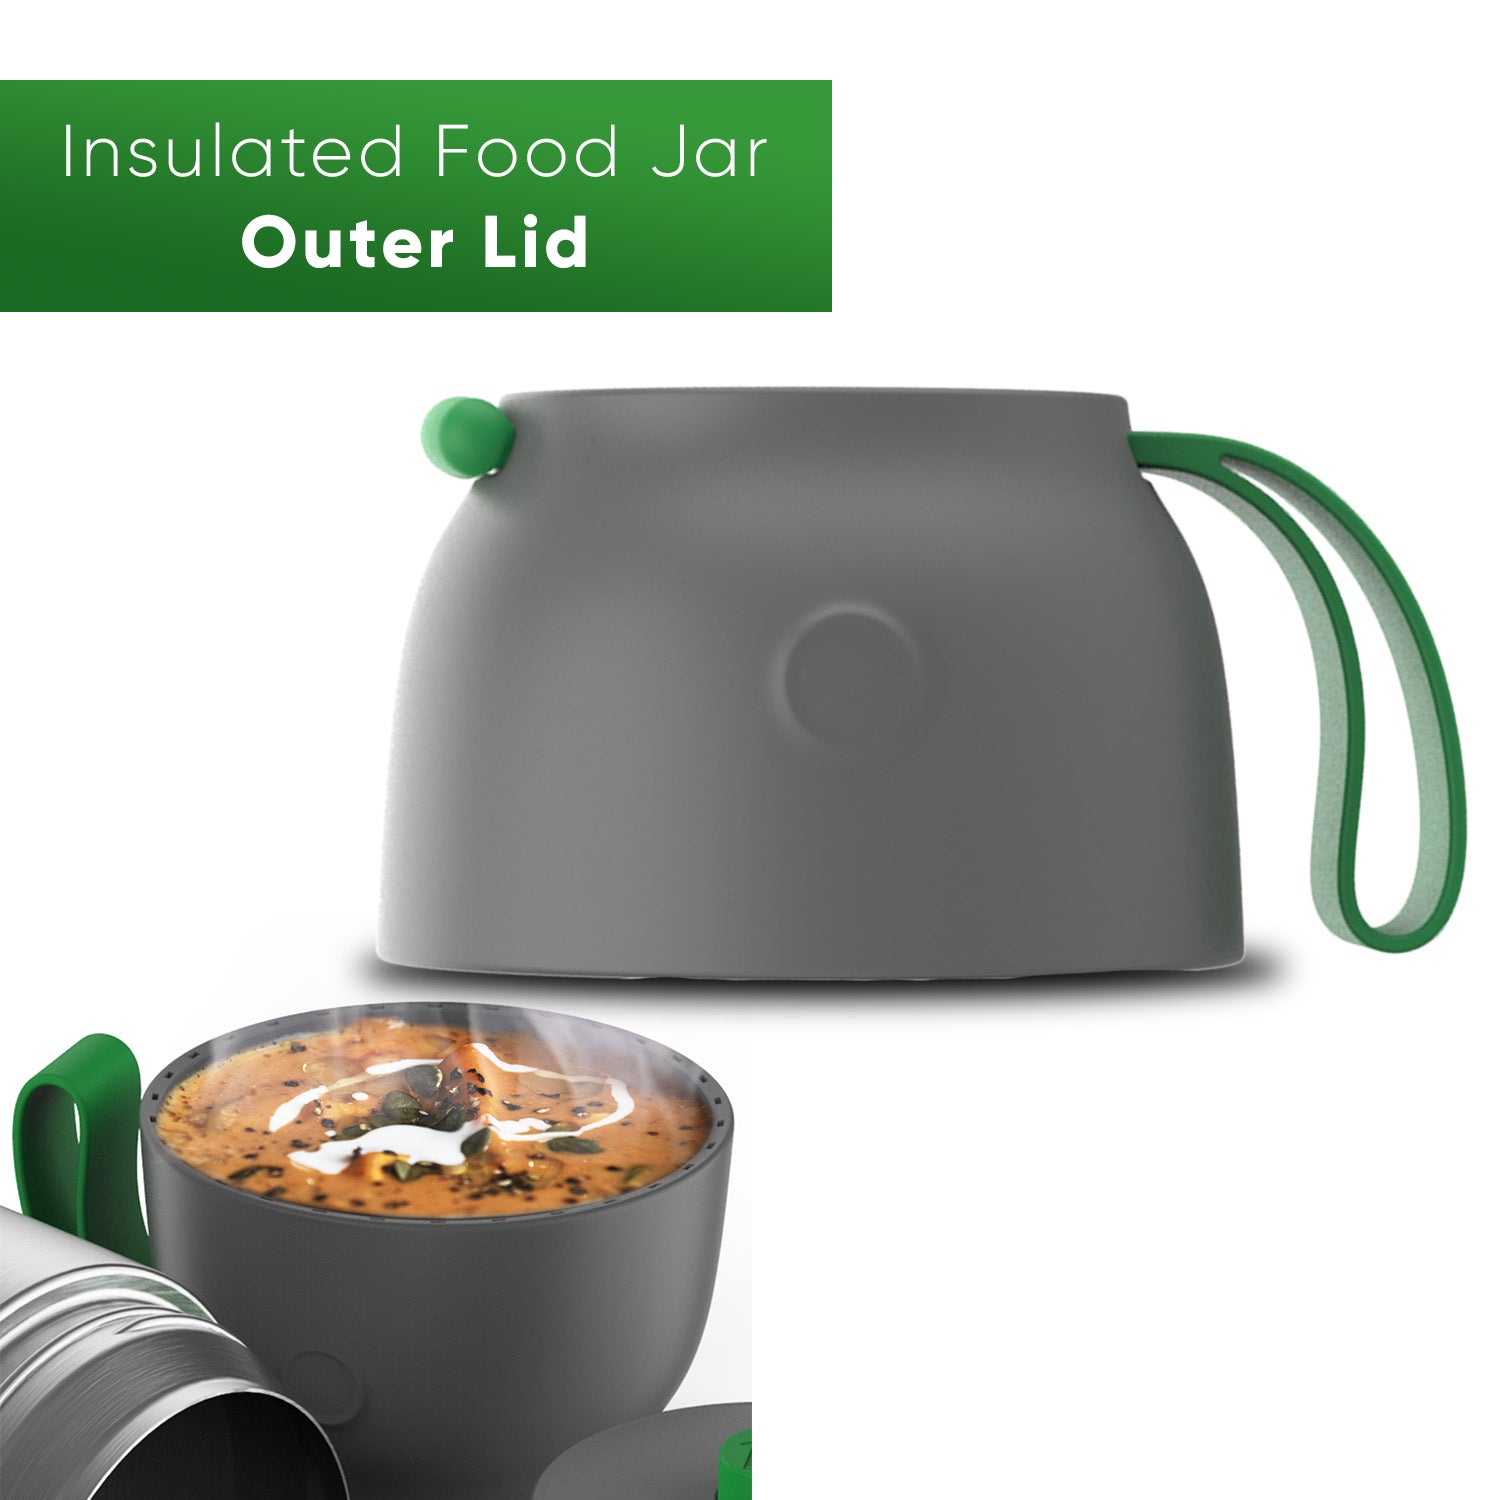 Insulated Food Jar - Outer Lid